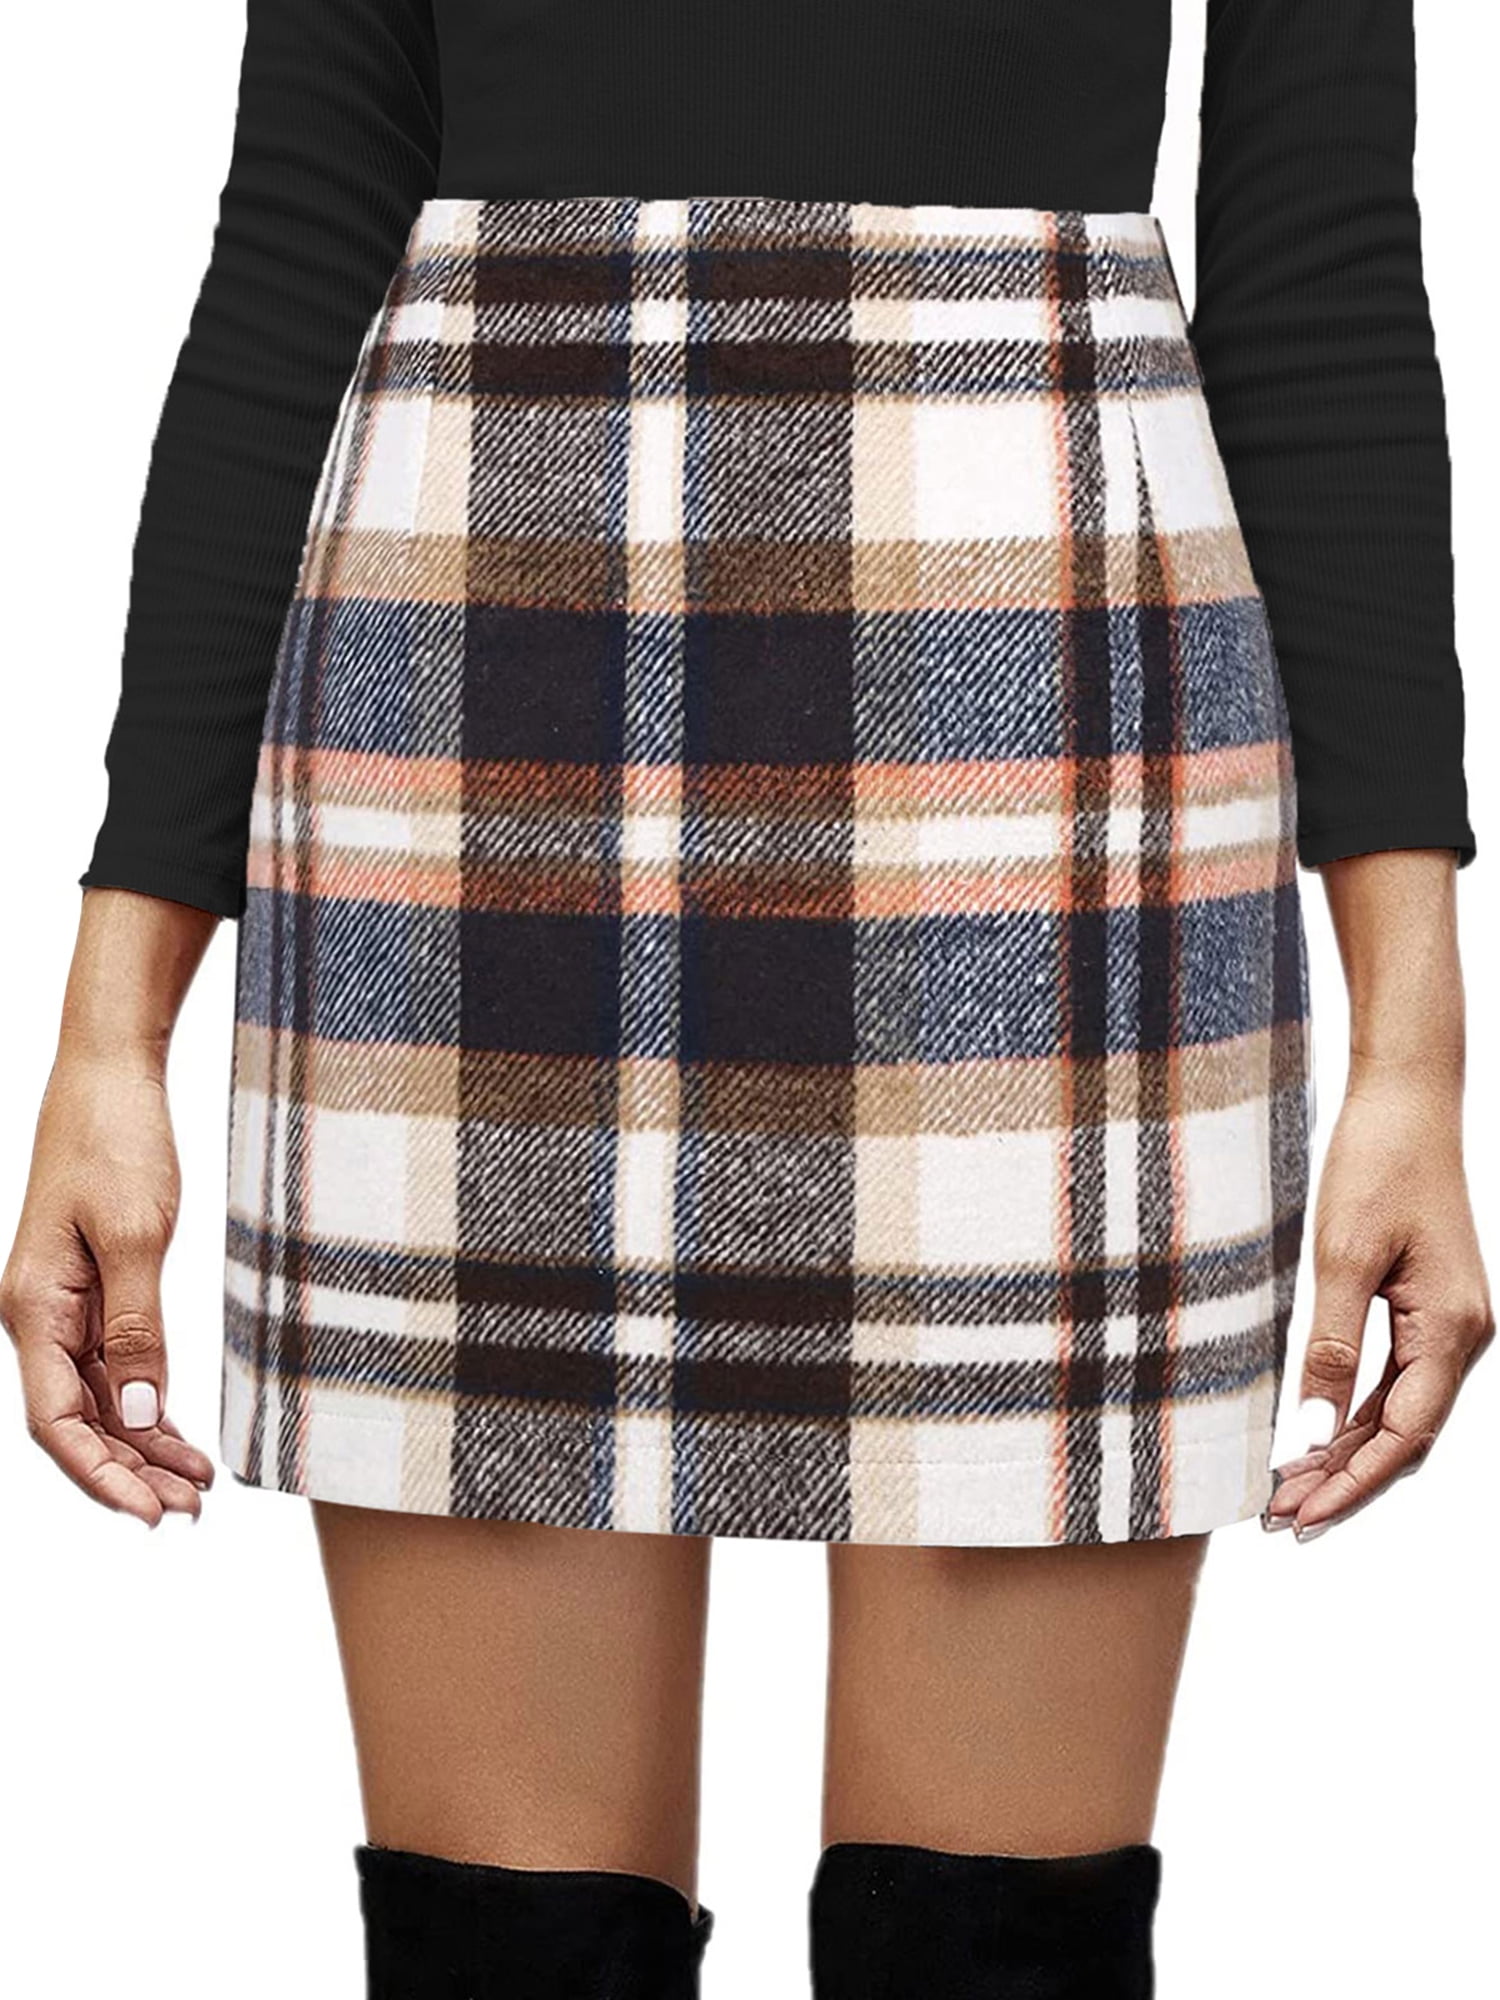 Details more than 224 wool pencil skirt